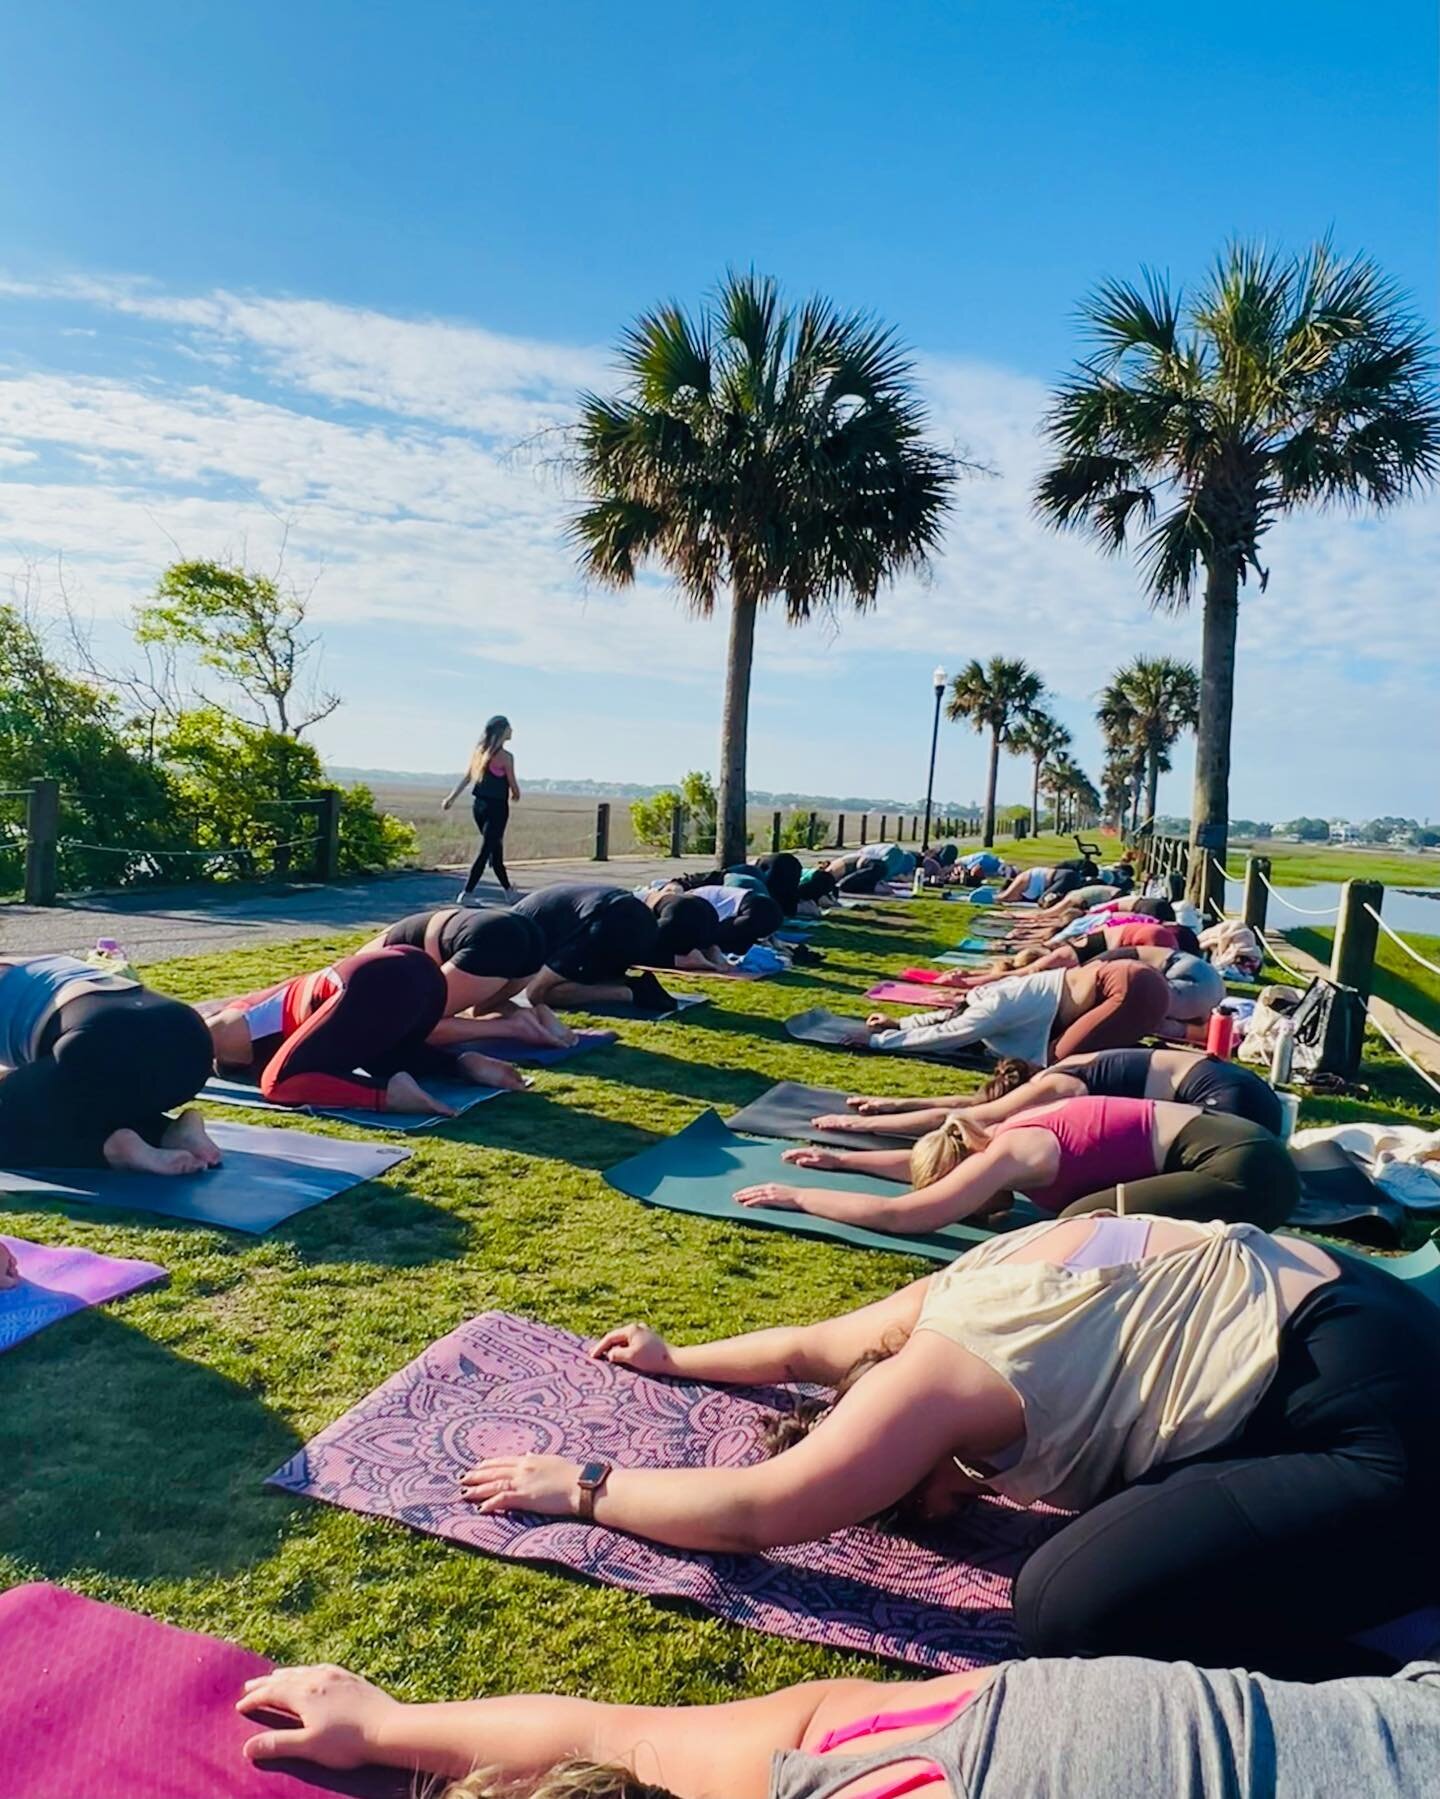 Rise &amp; Shine 🌞

What is FREEDOM? What is this studio all about? Experience it for yourself! Are you signed up for one of our May Pop Ups?

Saturday May 20th | 9AM | Meet the Team Beach Workout on Sullivans Island! Yoga, Sculpt, &amp; Dance follo